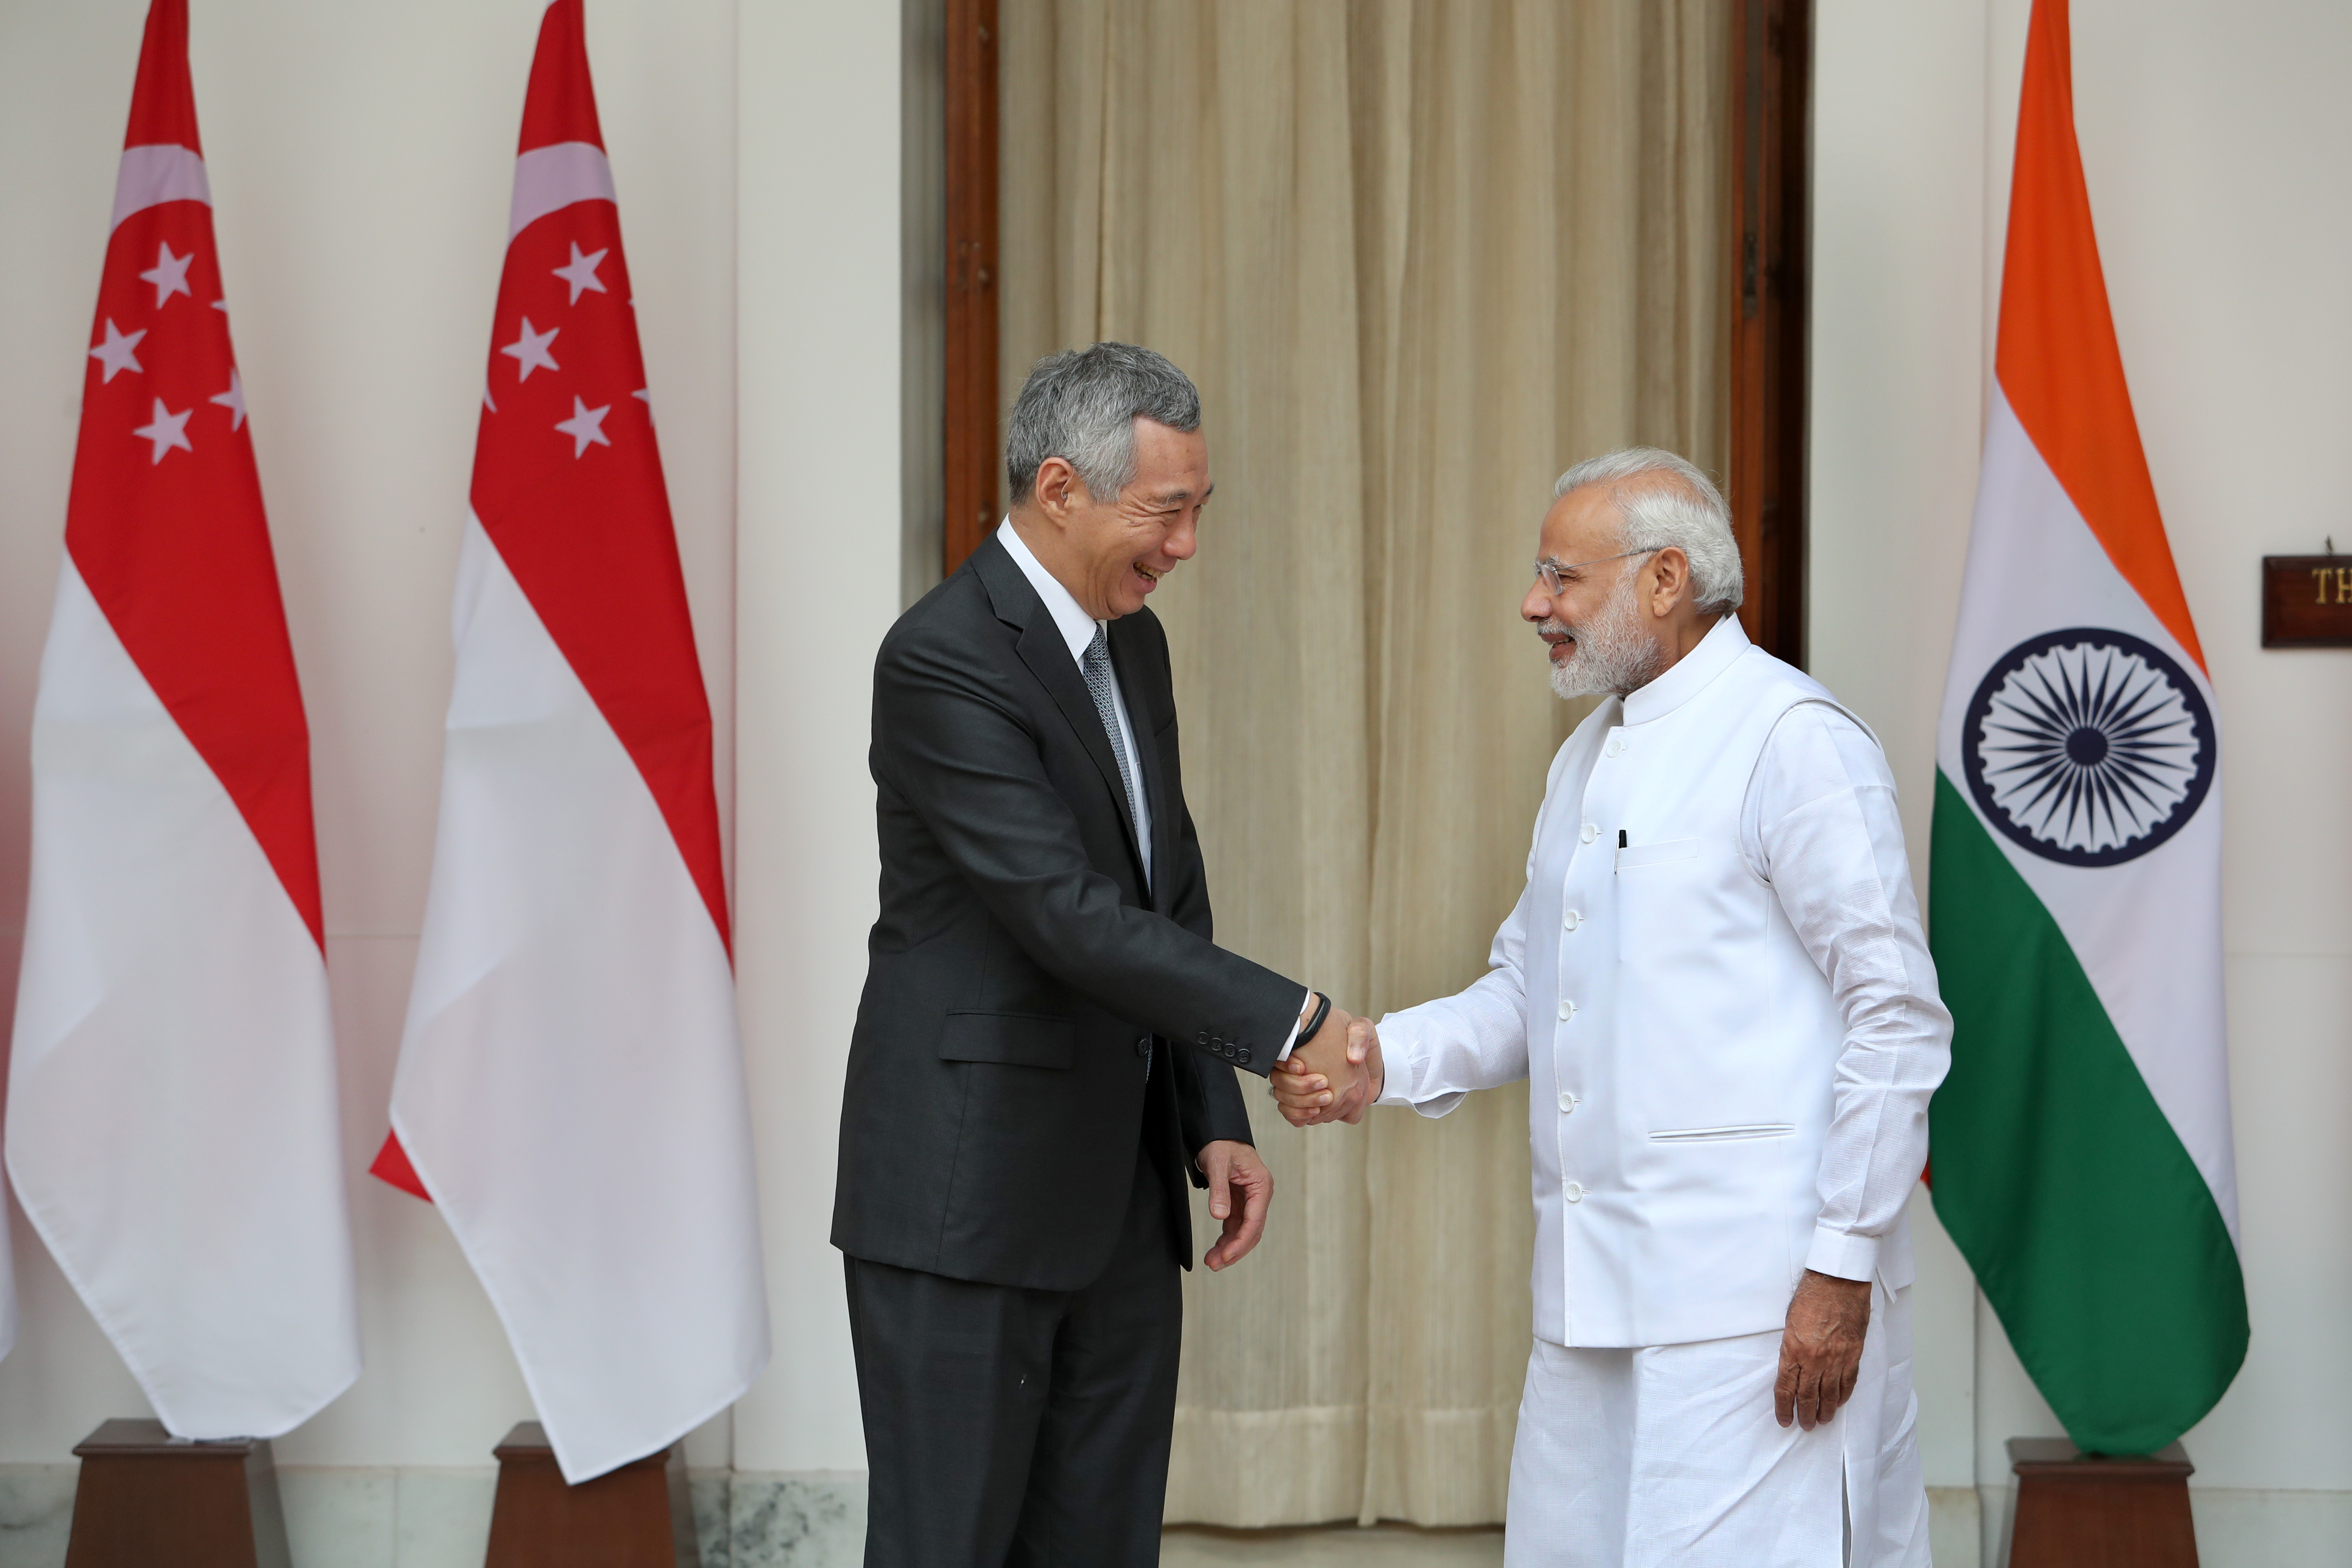 PM Lee Hsien Loong at Joint Press Conference with PM Narenda Modi in New Delhi, India